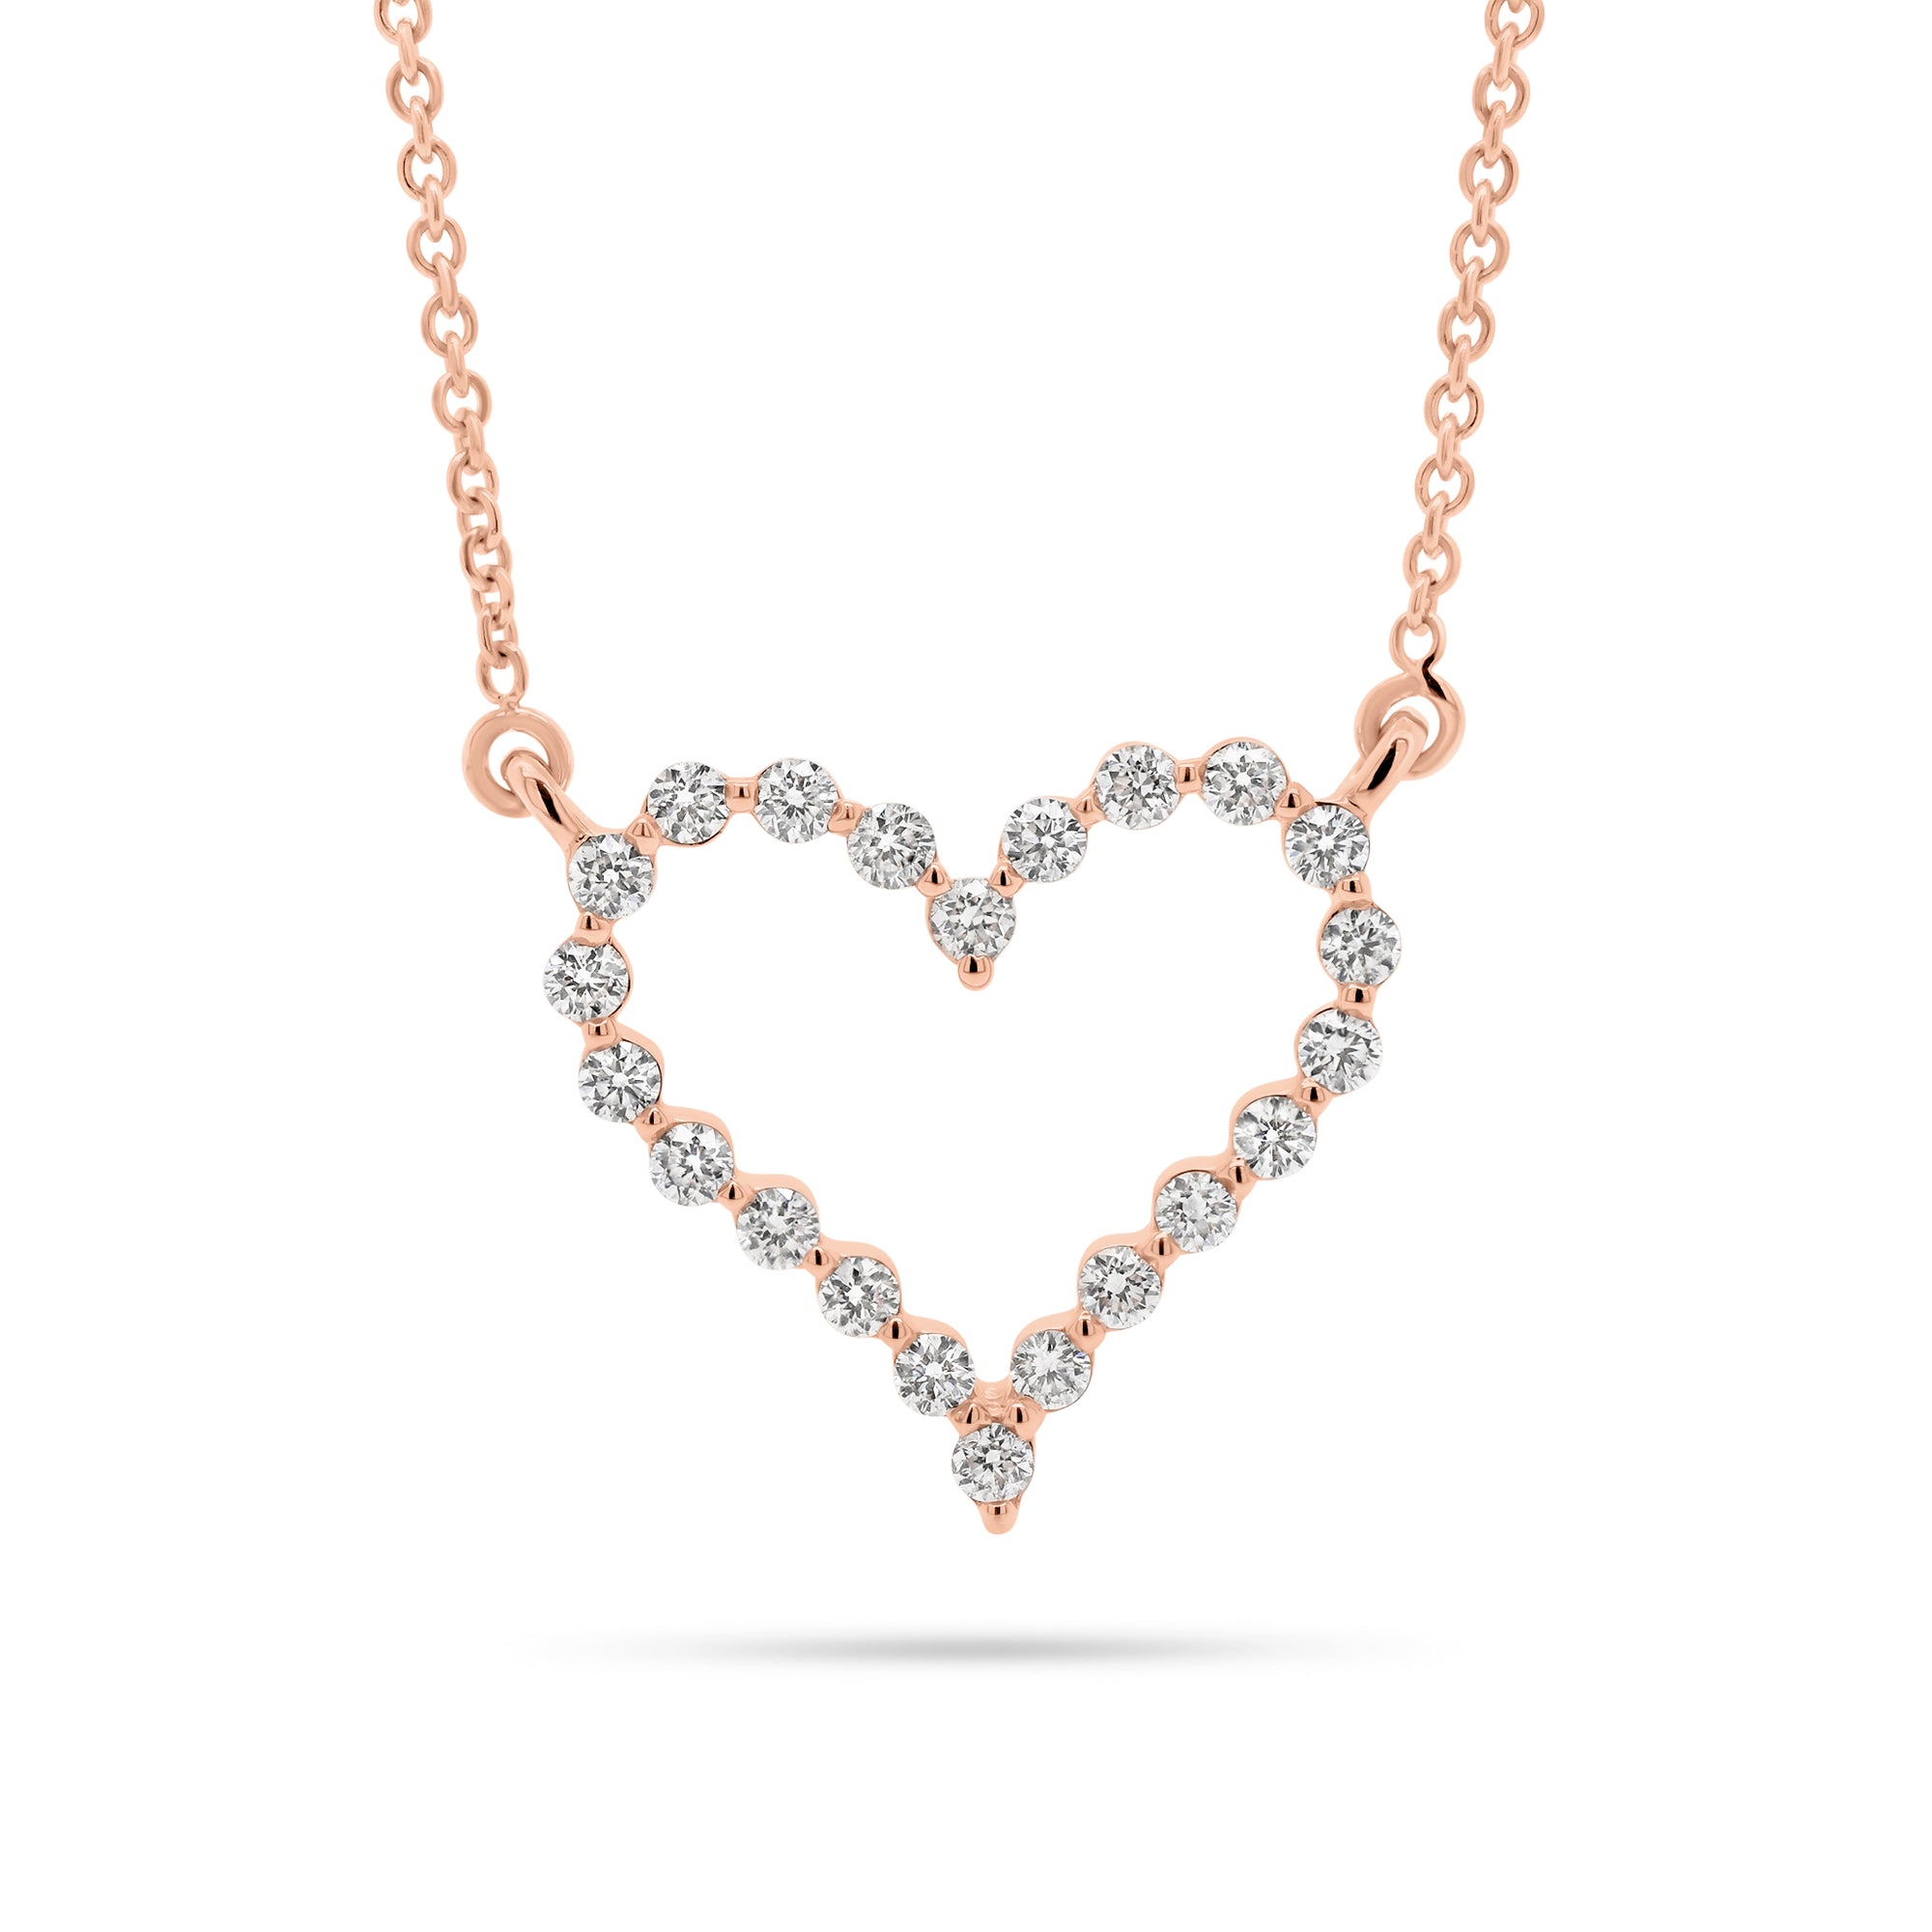 Diamond Open Heart Necklace  - 14K gold weighing 2.56 grams  - 22 round diamonds totaling 0.33 carats